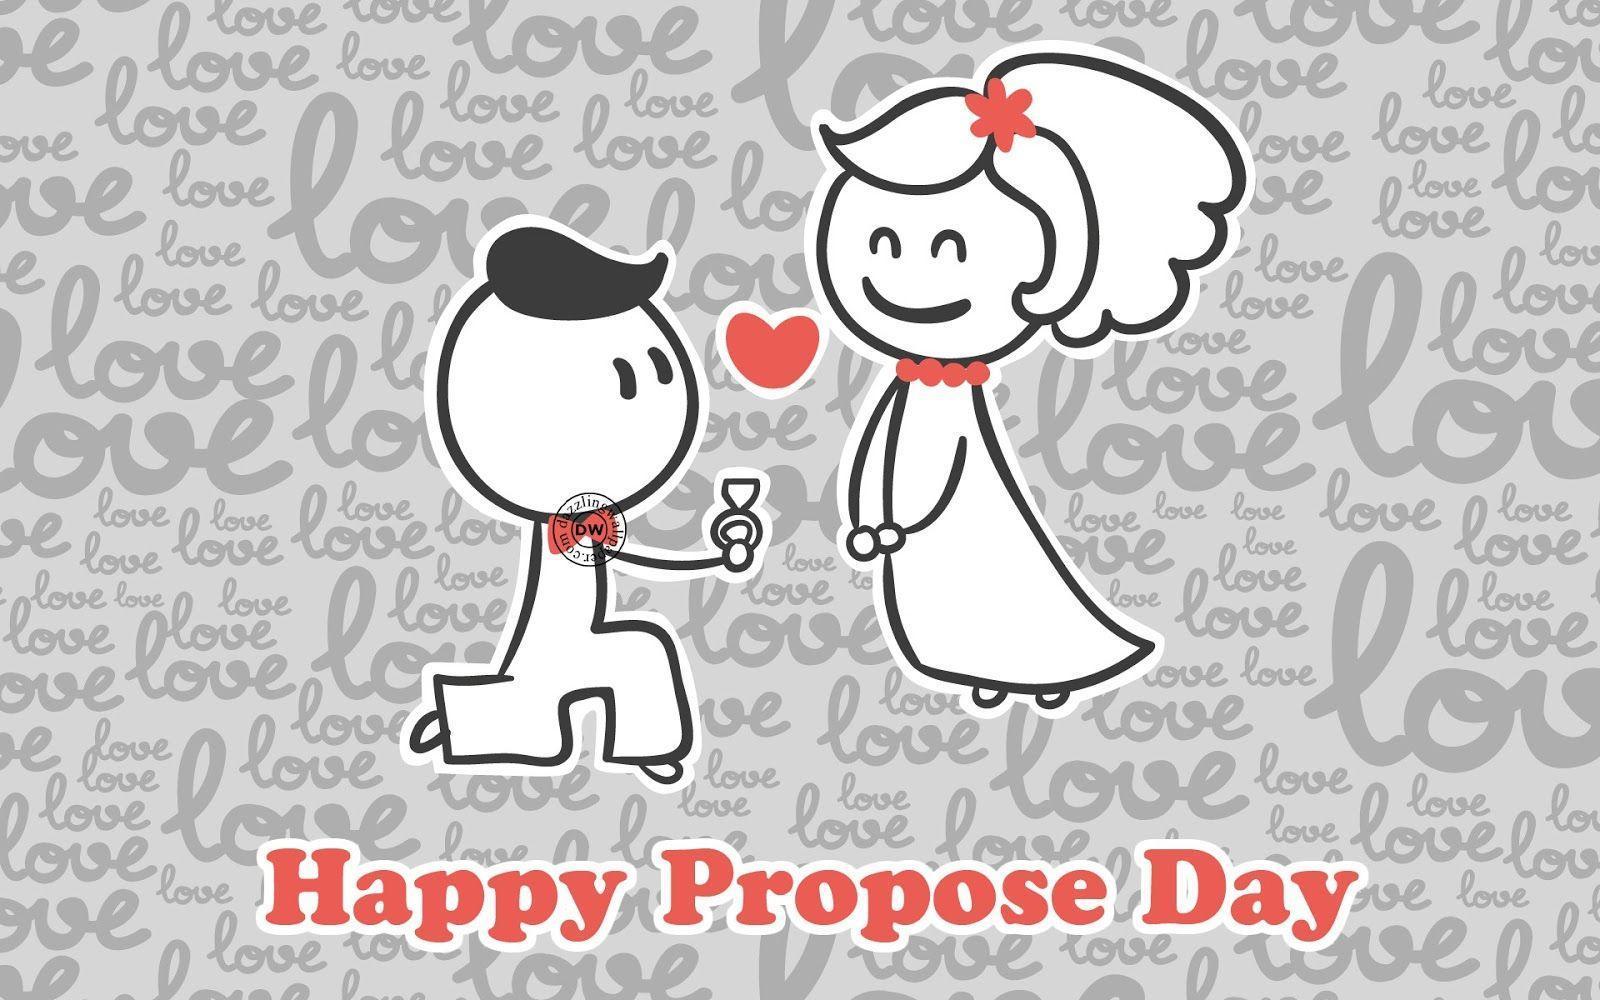 Romantic Happy Propose Day 2017 Image, HD Wallpaper, Picture